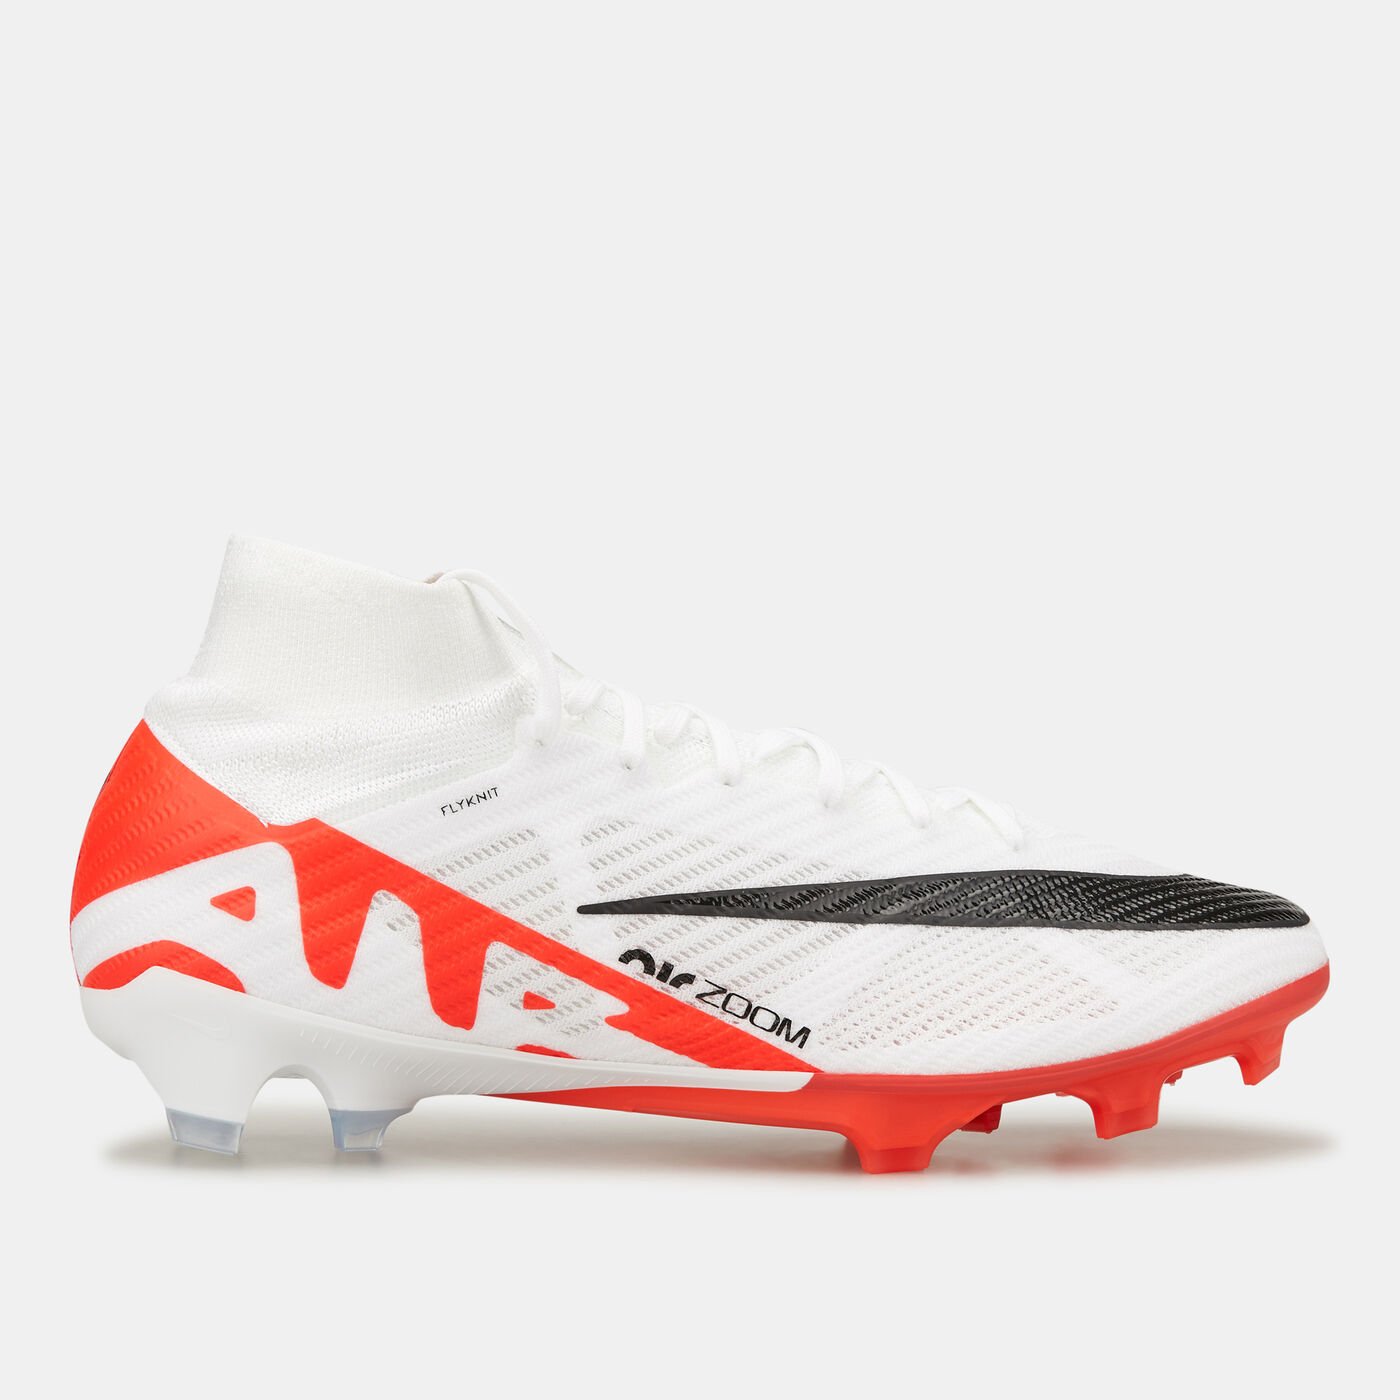 Men's Mercurial Superfly 9 Elite Firm-Ground Football Shoes